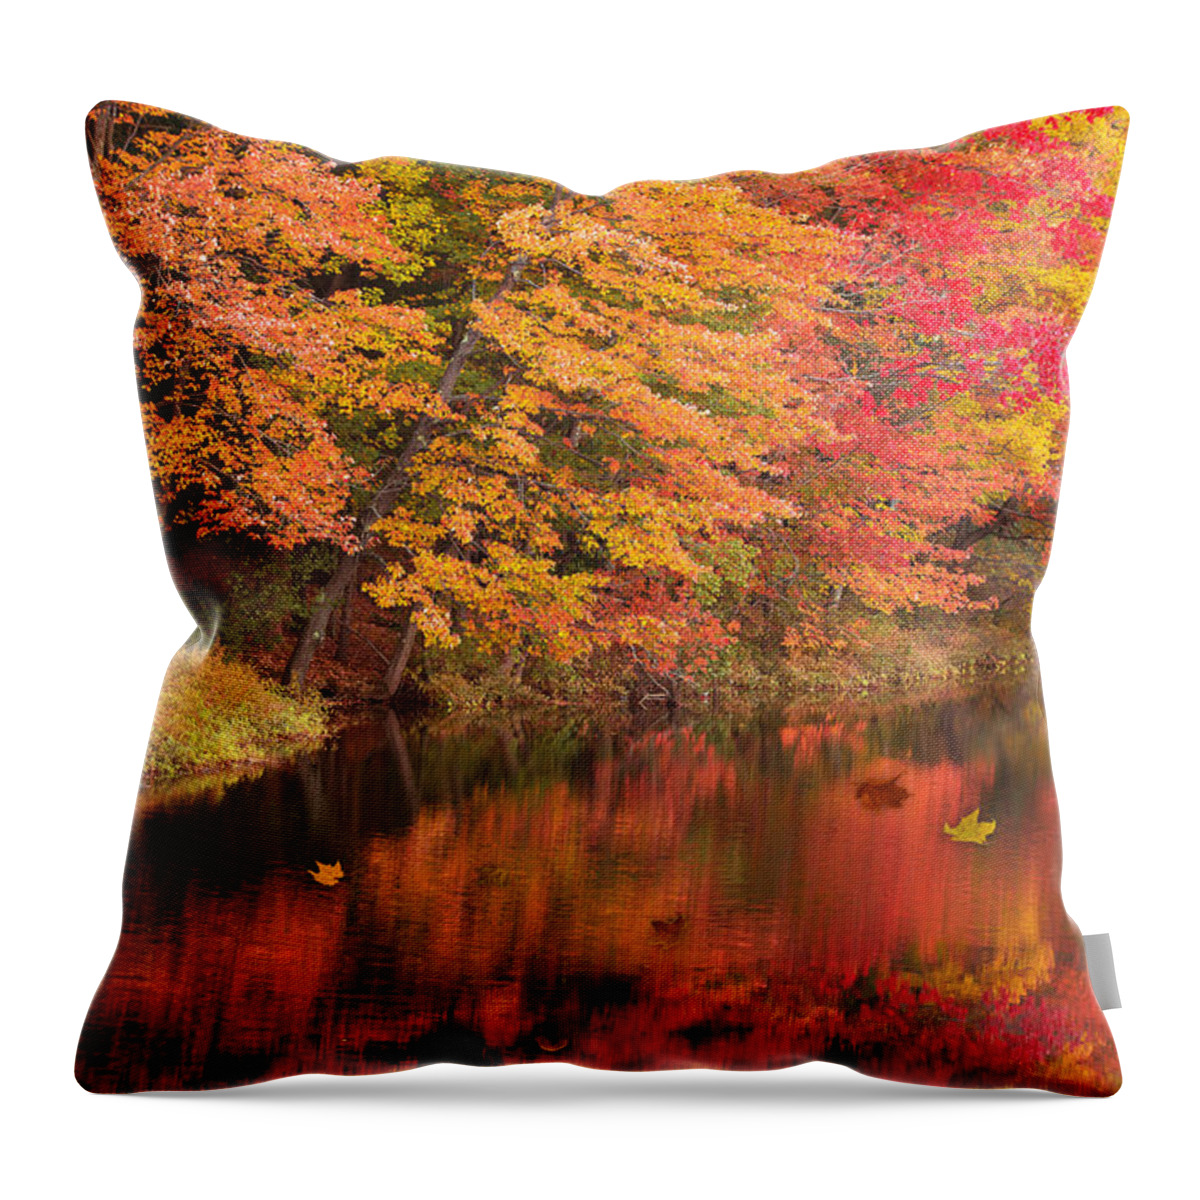 2015 Throw Pillow featuring the photograph Natures Peace by Brenda Giasson